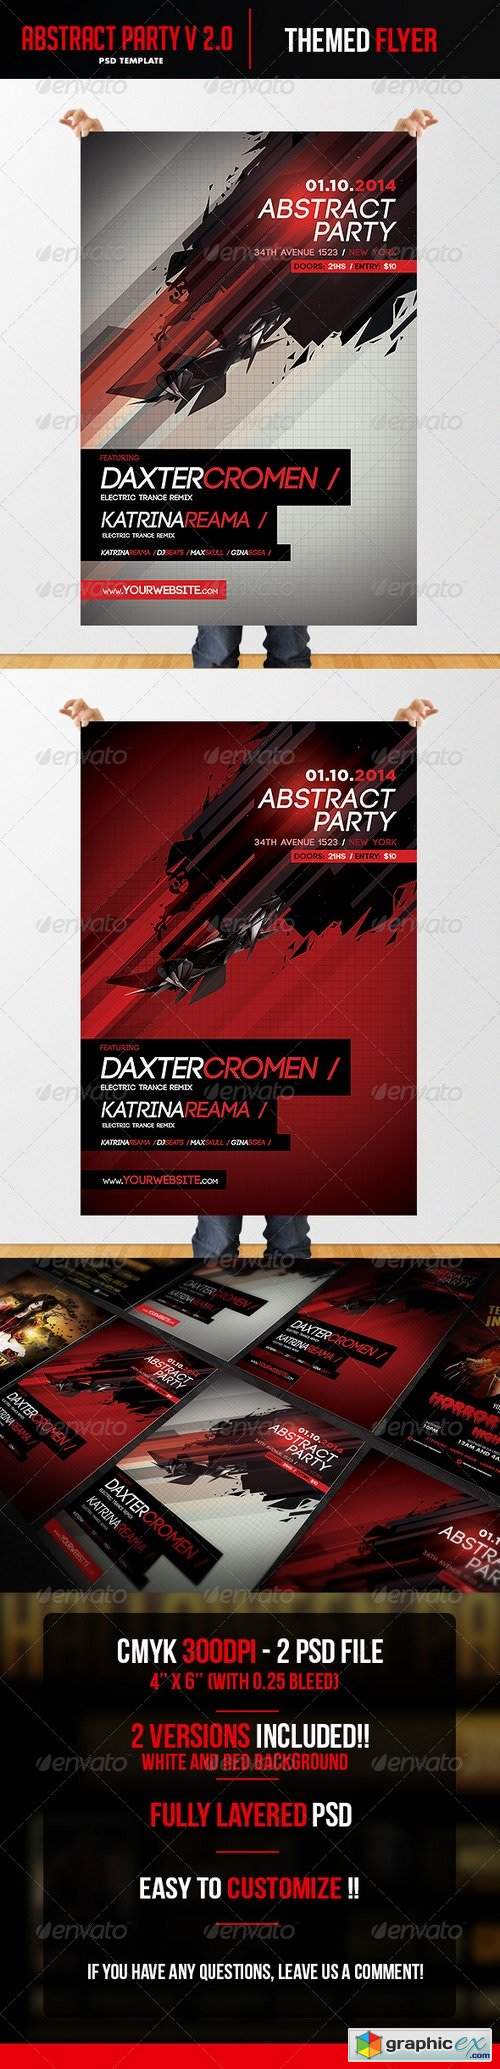 Abstract V2 Flyer Template